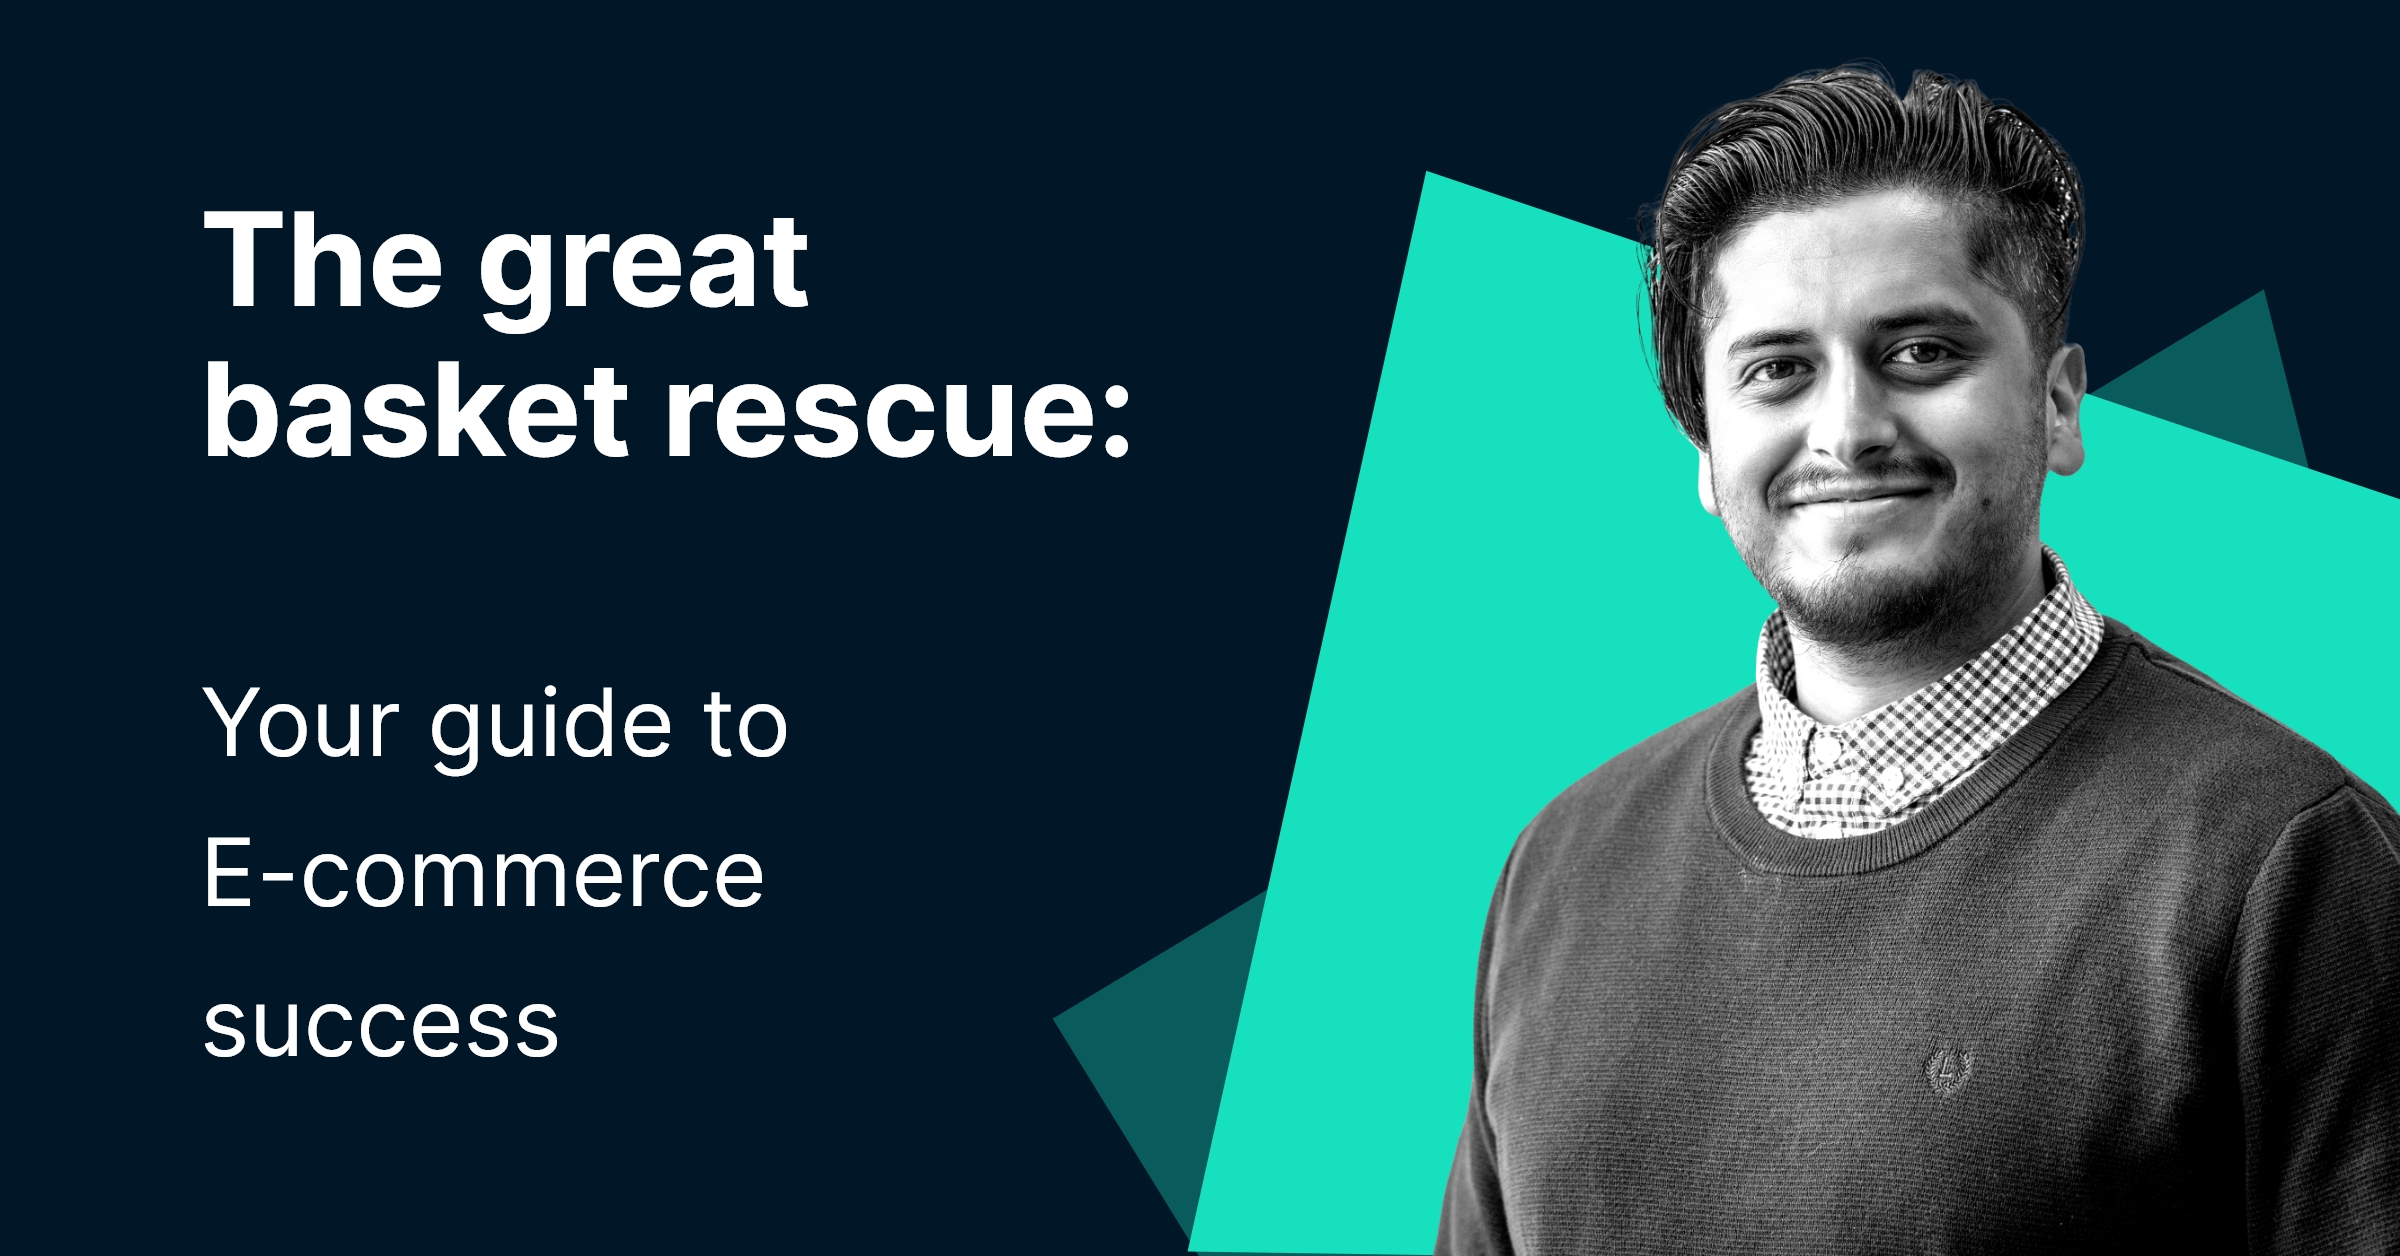 The great basket rescue: Your guide to Ecommerce success